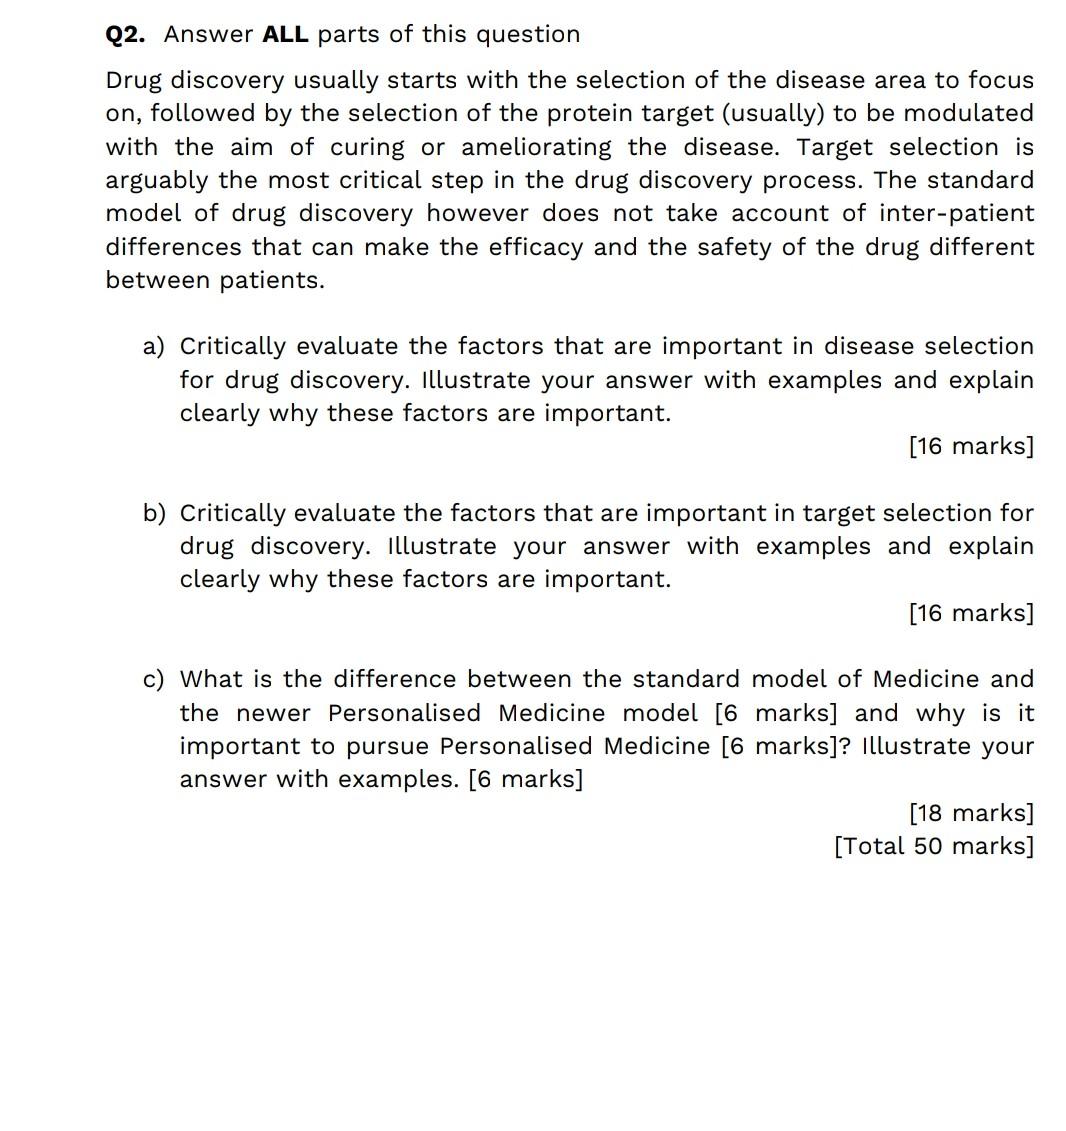 Q2. Answer ALL parts of this question
Drug discovery usually starts with the selection of the disease area to focus
on, follo